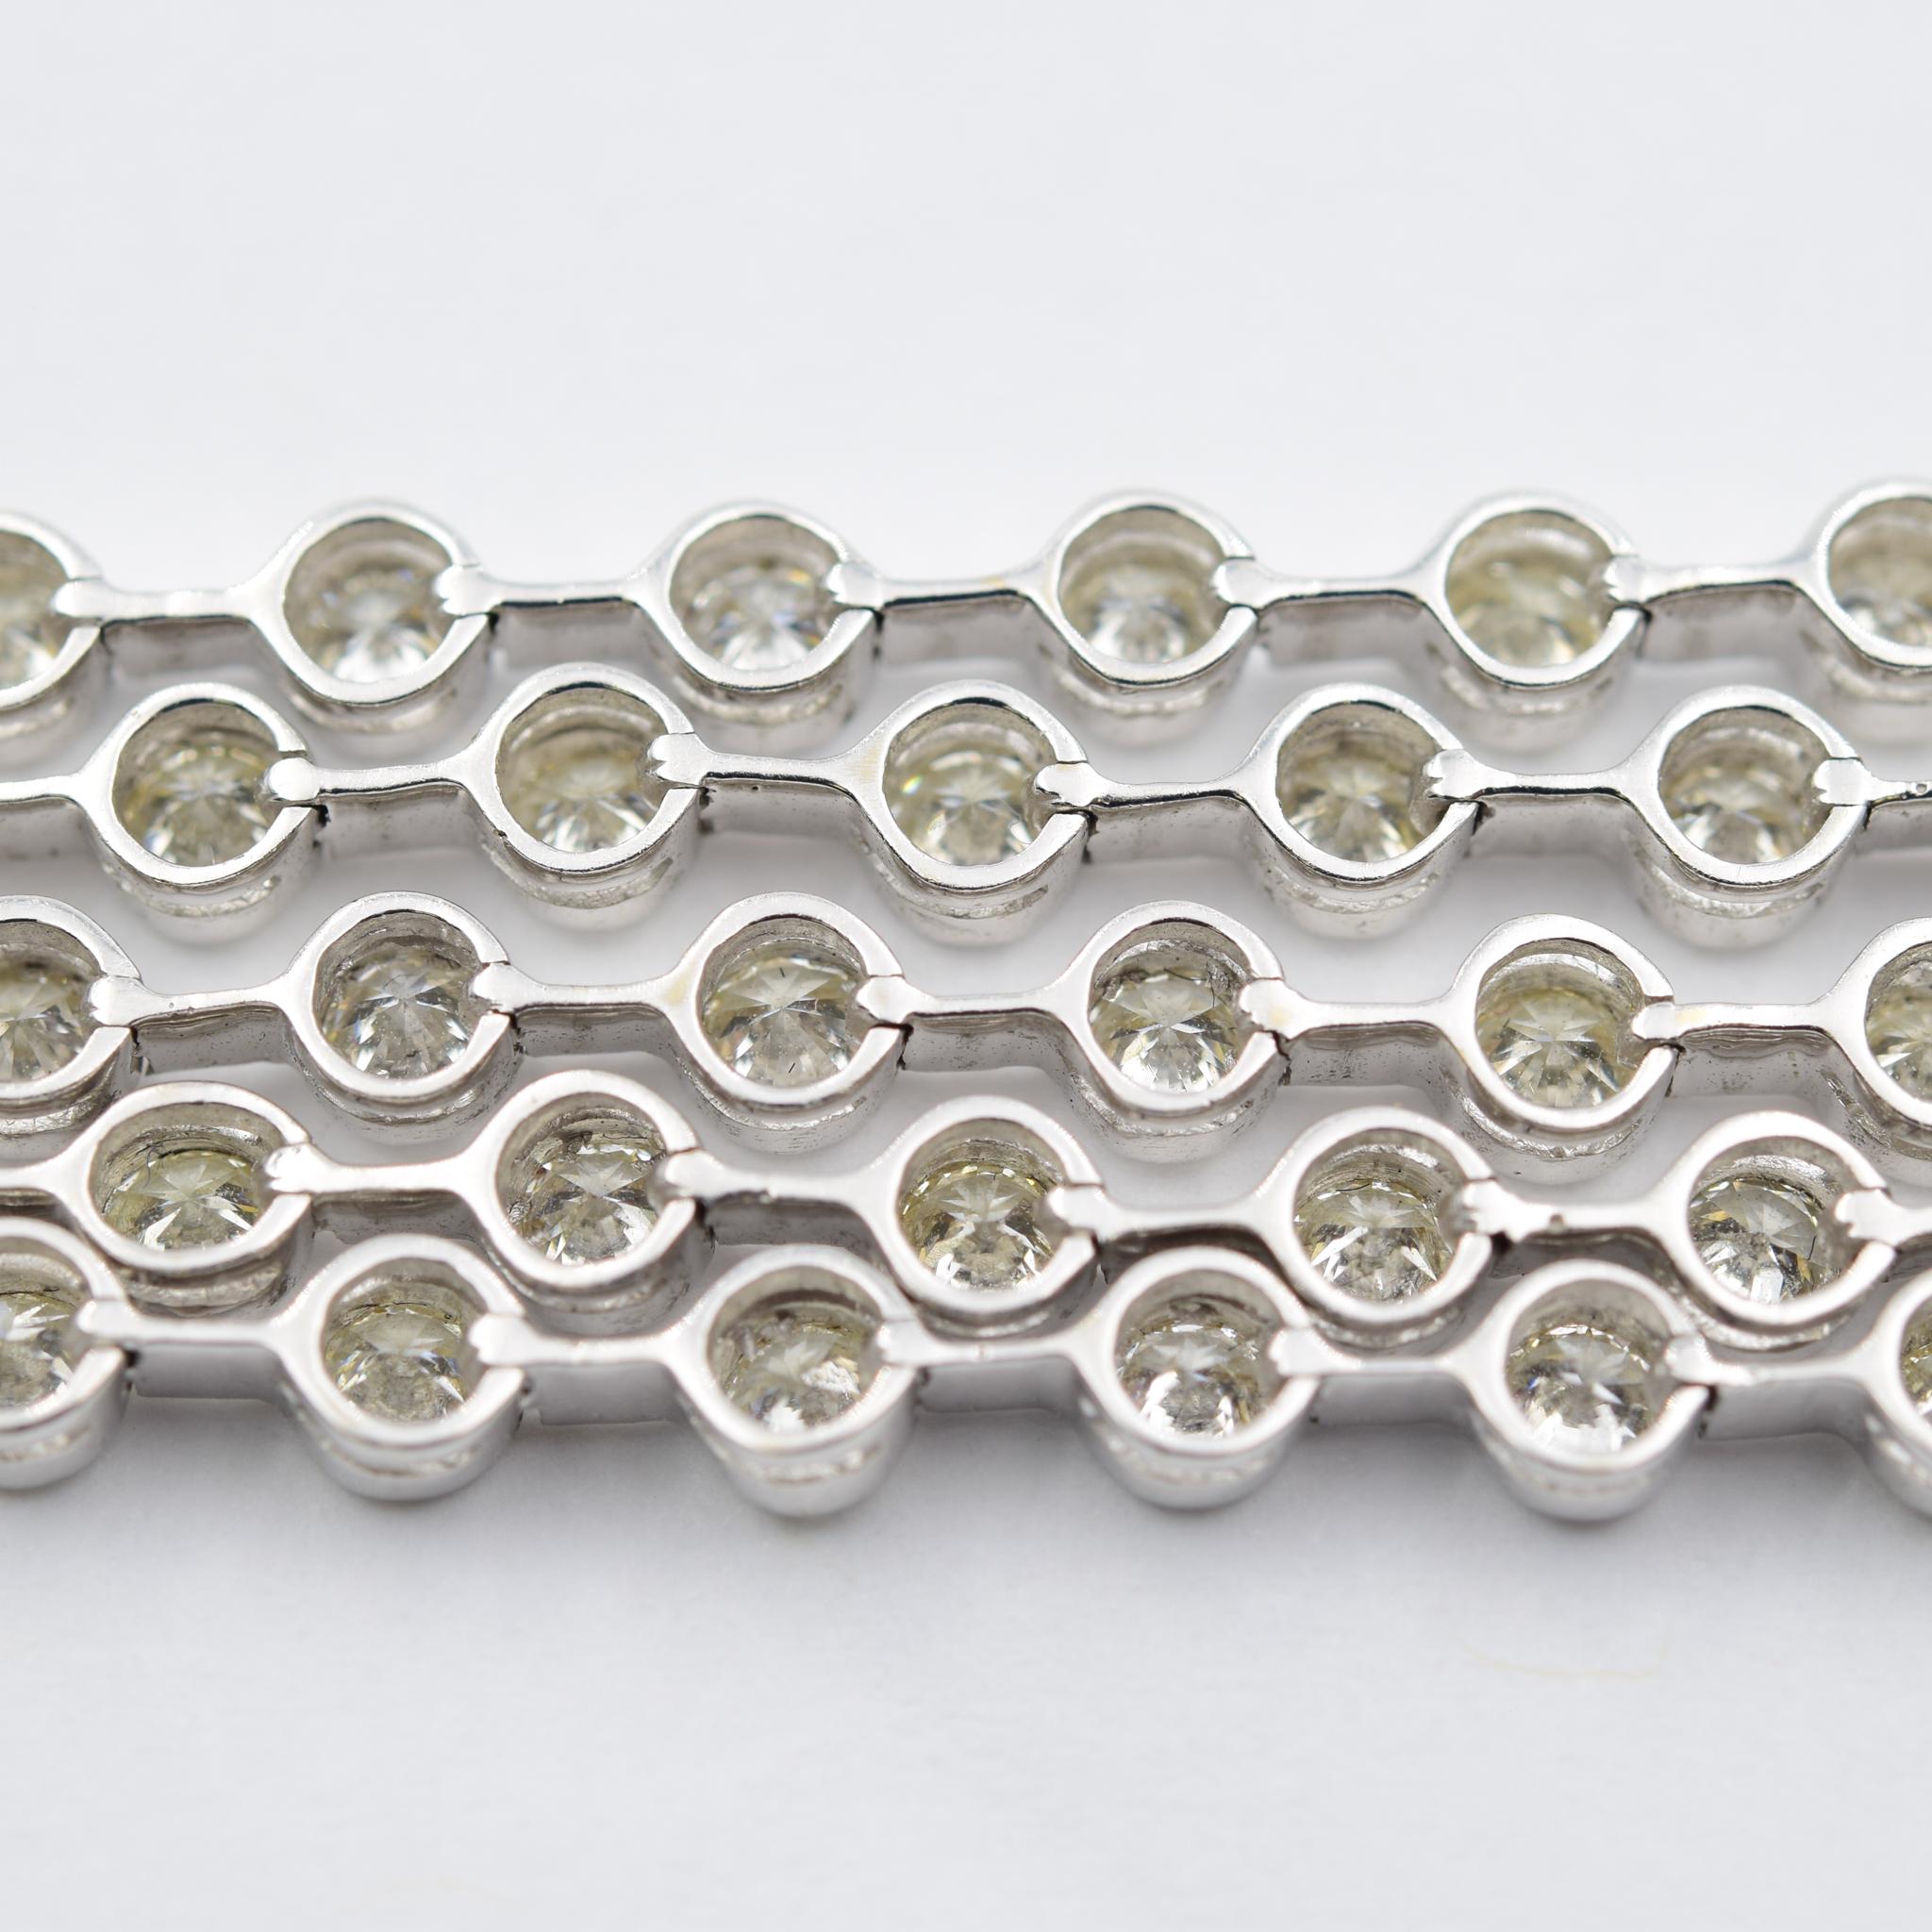 This vintage bracelet contains approximately 8.00 carats of diamonds. These diamonds are bezel set in 5 rows of high-quality white diamonds. It was crafted in 18k white gold. This bracelet has a unique twist on the typical diamond bracelet. Because